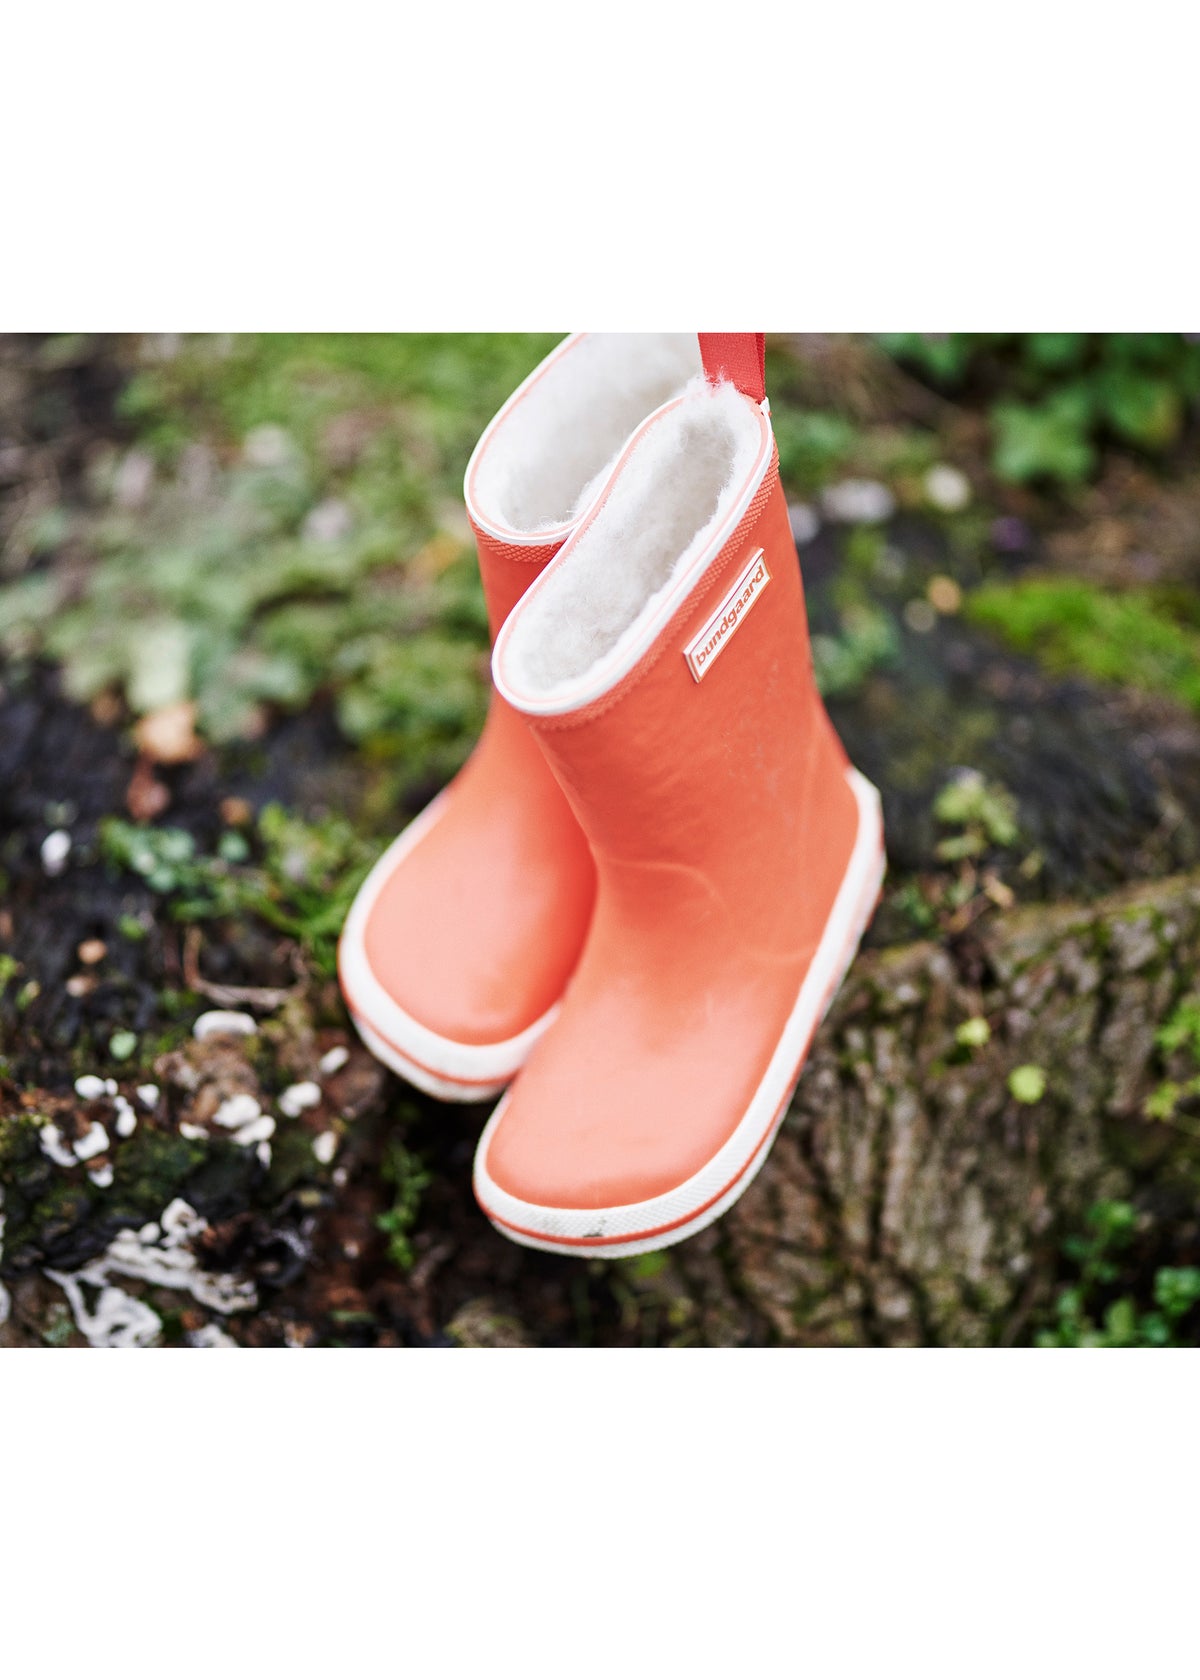 Rubber boots with a warm lining - red, Charly High Warm